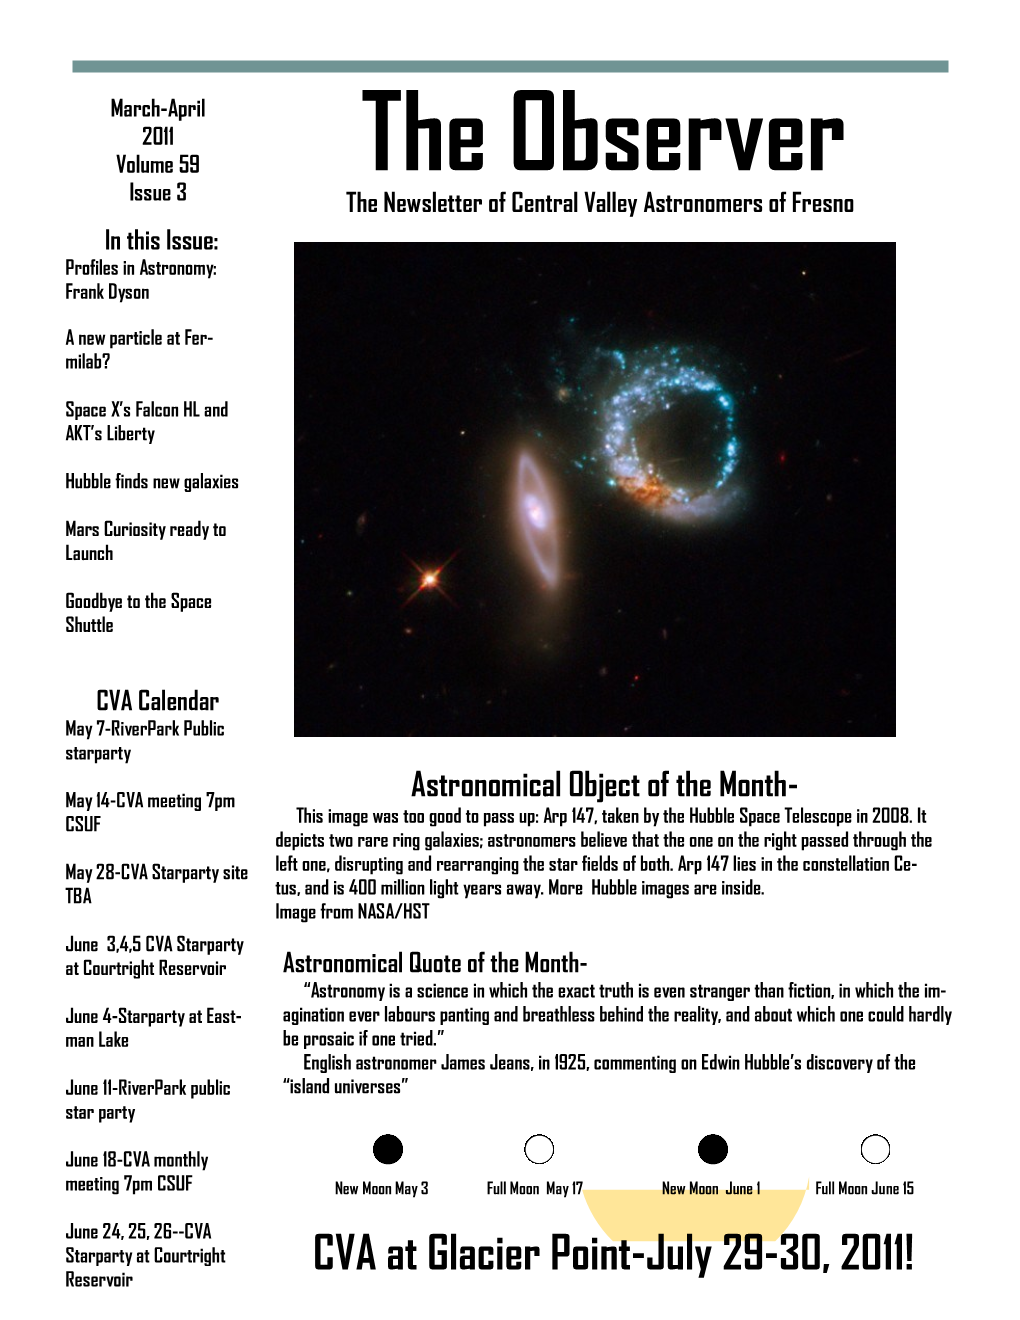 The Observer Issue 3 the Newsletter of Central Valley Astronomers of Fresno in This Issue: Profiles in Astronomy: Frank Dyson